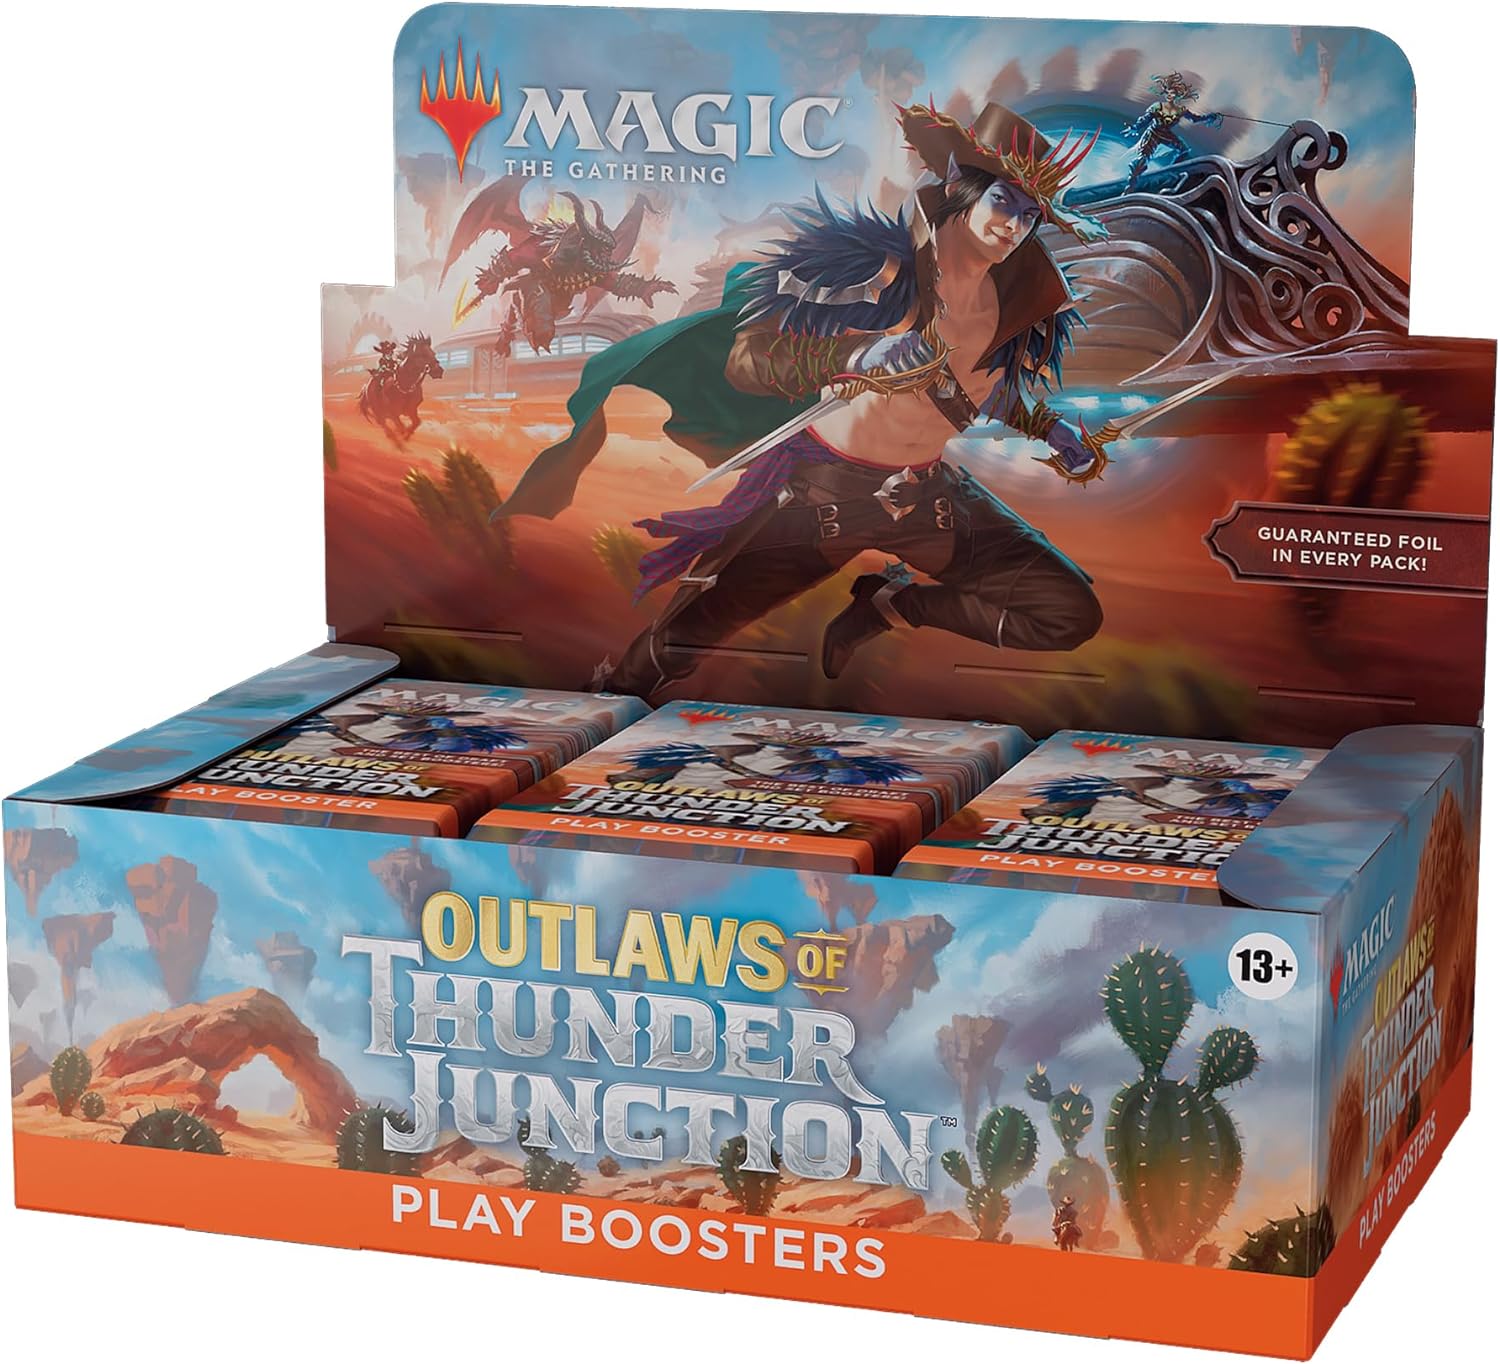 Magic: The Gathering Outlaws of Thunder Junction Play Booster Box - 36 Packs (504 Magic Cards), Trading Cards made by Magic The Gathering. Exit 23 Games 